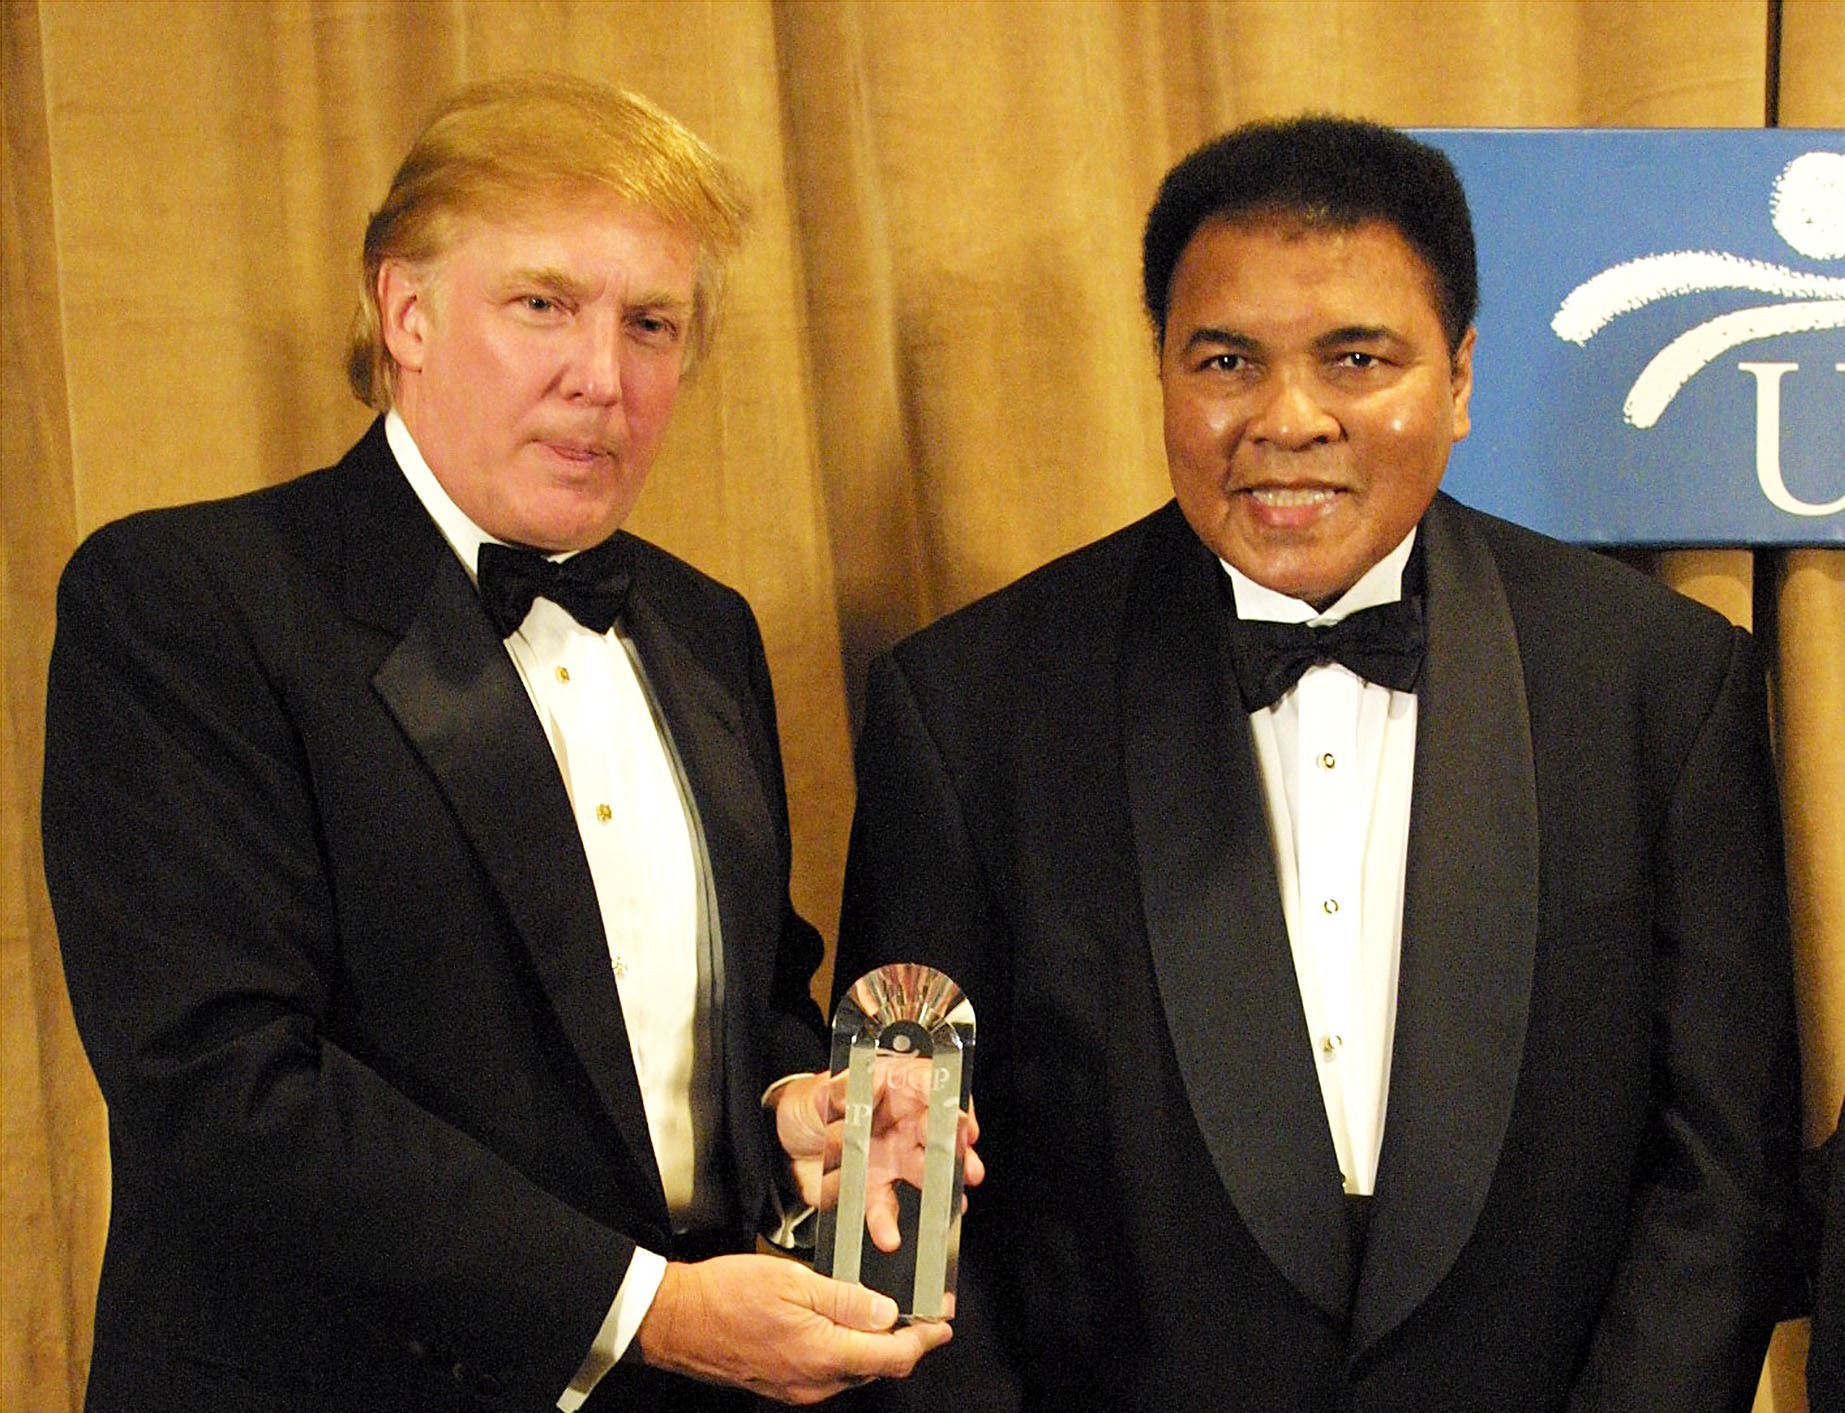 Muhammad Ali was said to be unimpressed by Donald Trump ©Getty Images